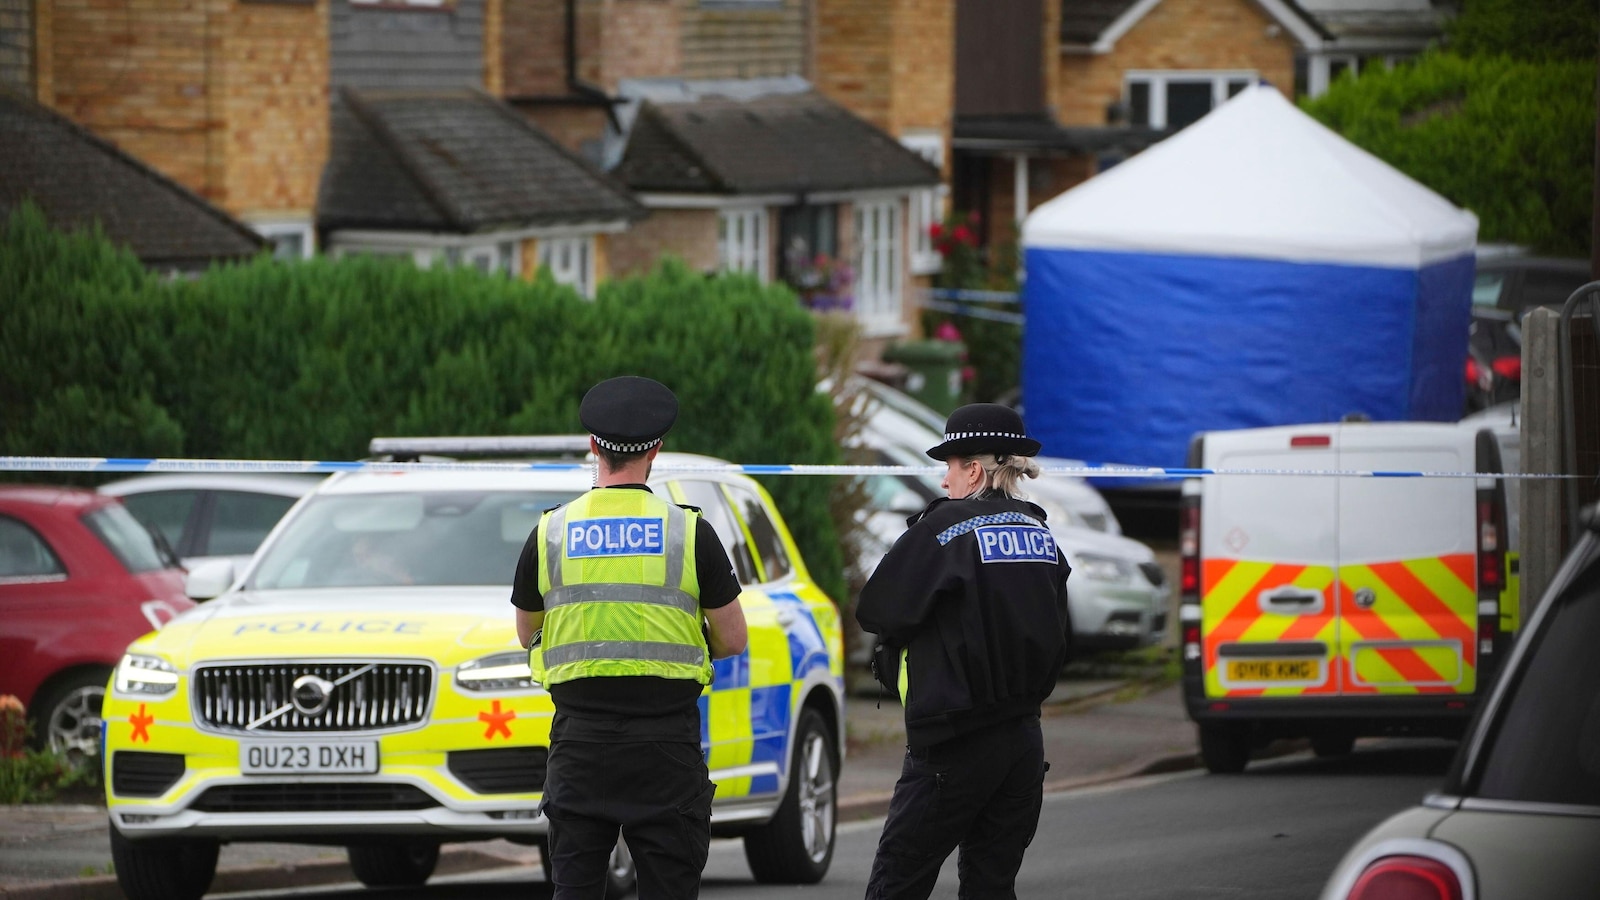 Man suspected of killing family of BBC radio commentator has been found, police say